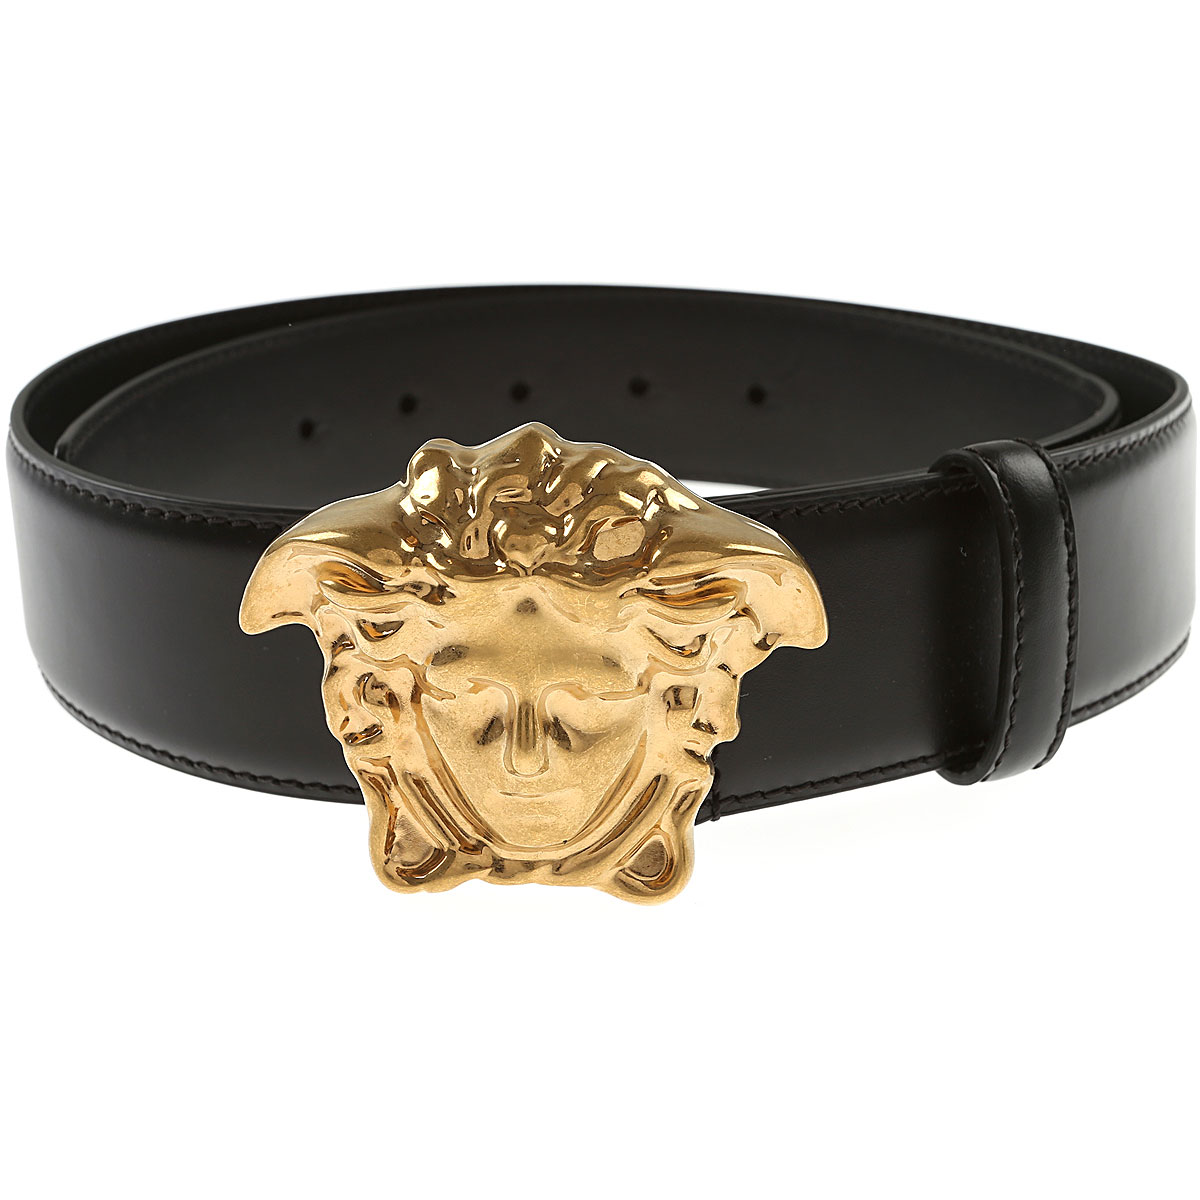 Mens Belts Gianni Versace, Style code 